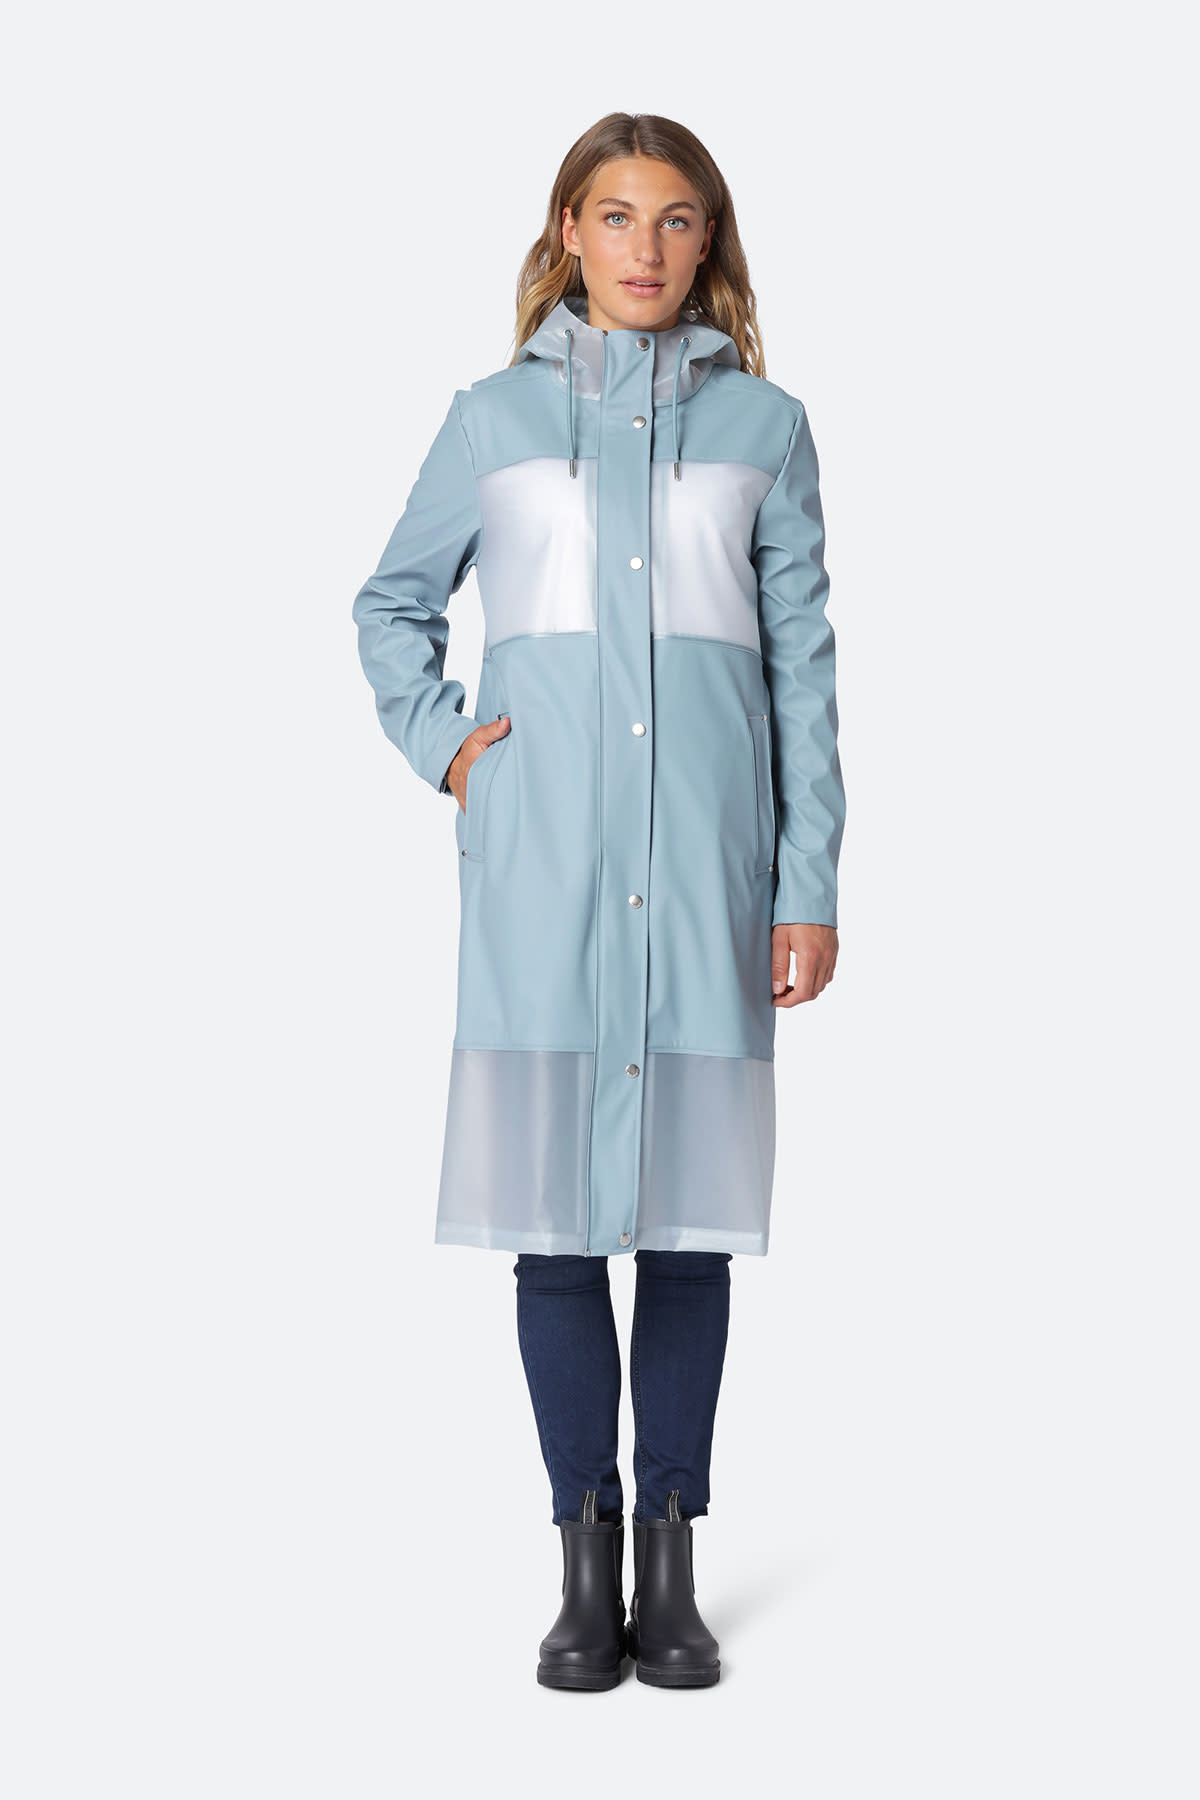 Handbag Raincoat - Another #copycat! Why spend $650 when you could spend  $20 on the original ?! #hbrc #owntherain #handbagraincoat #fashion  #accessory #rainfashion #pvc #springtrends #trends